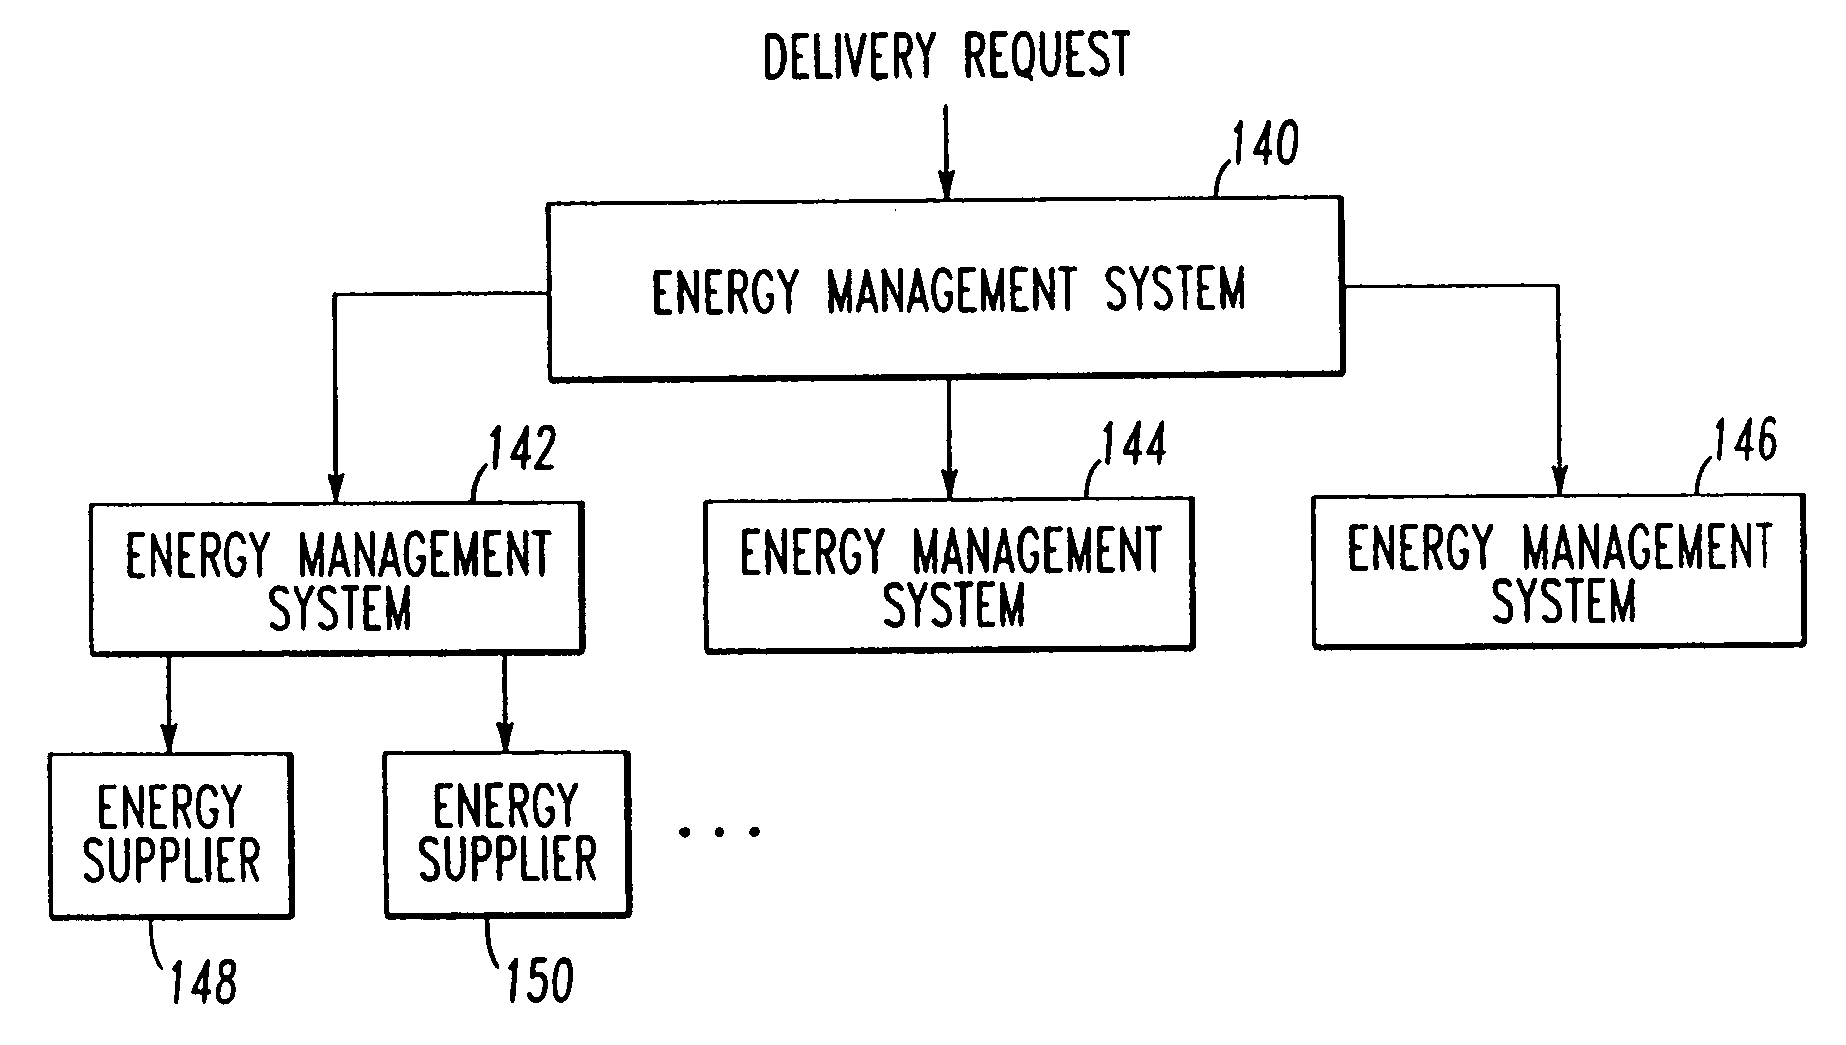 System and method for planning energy supply and interface to an energy management system for use in planning energy supply